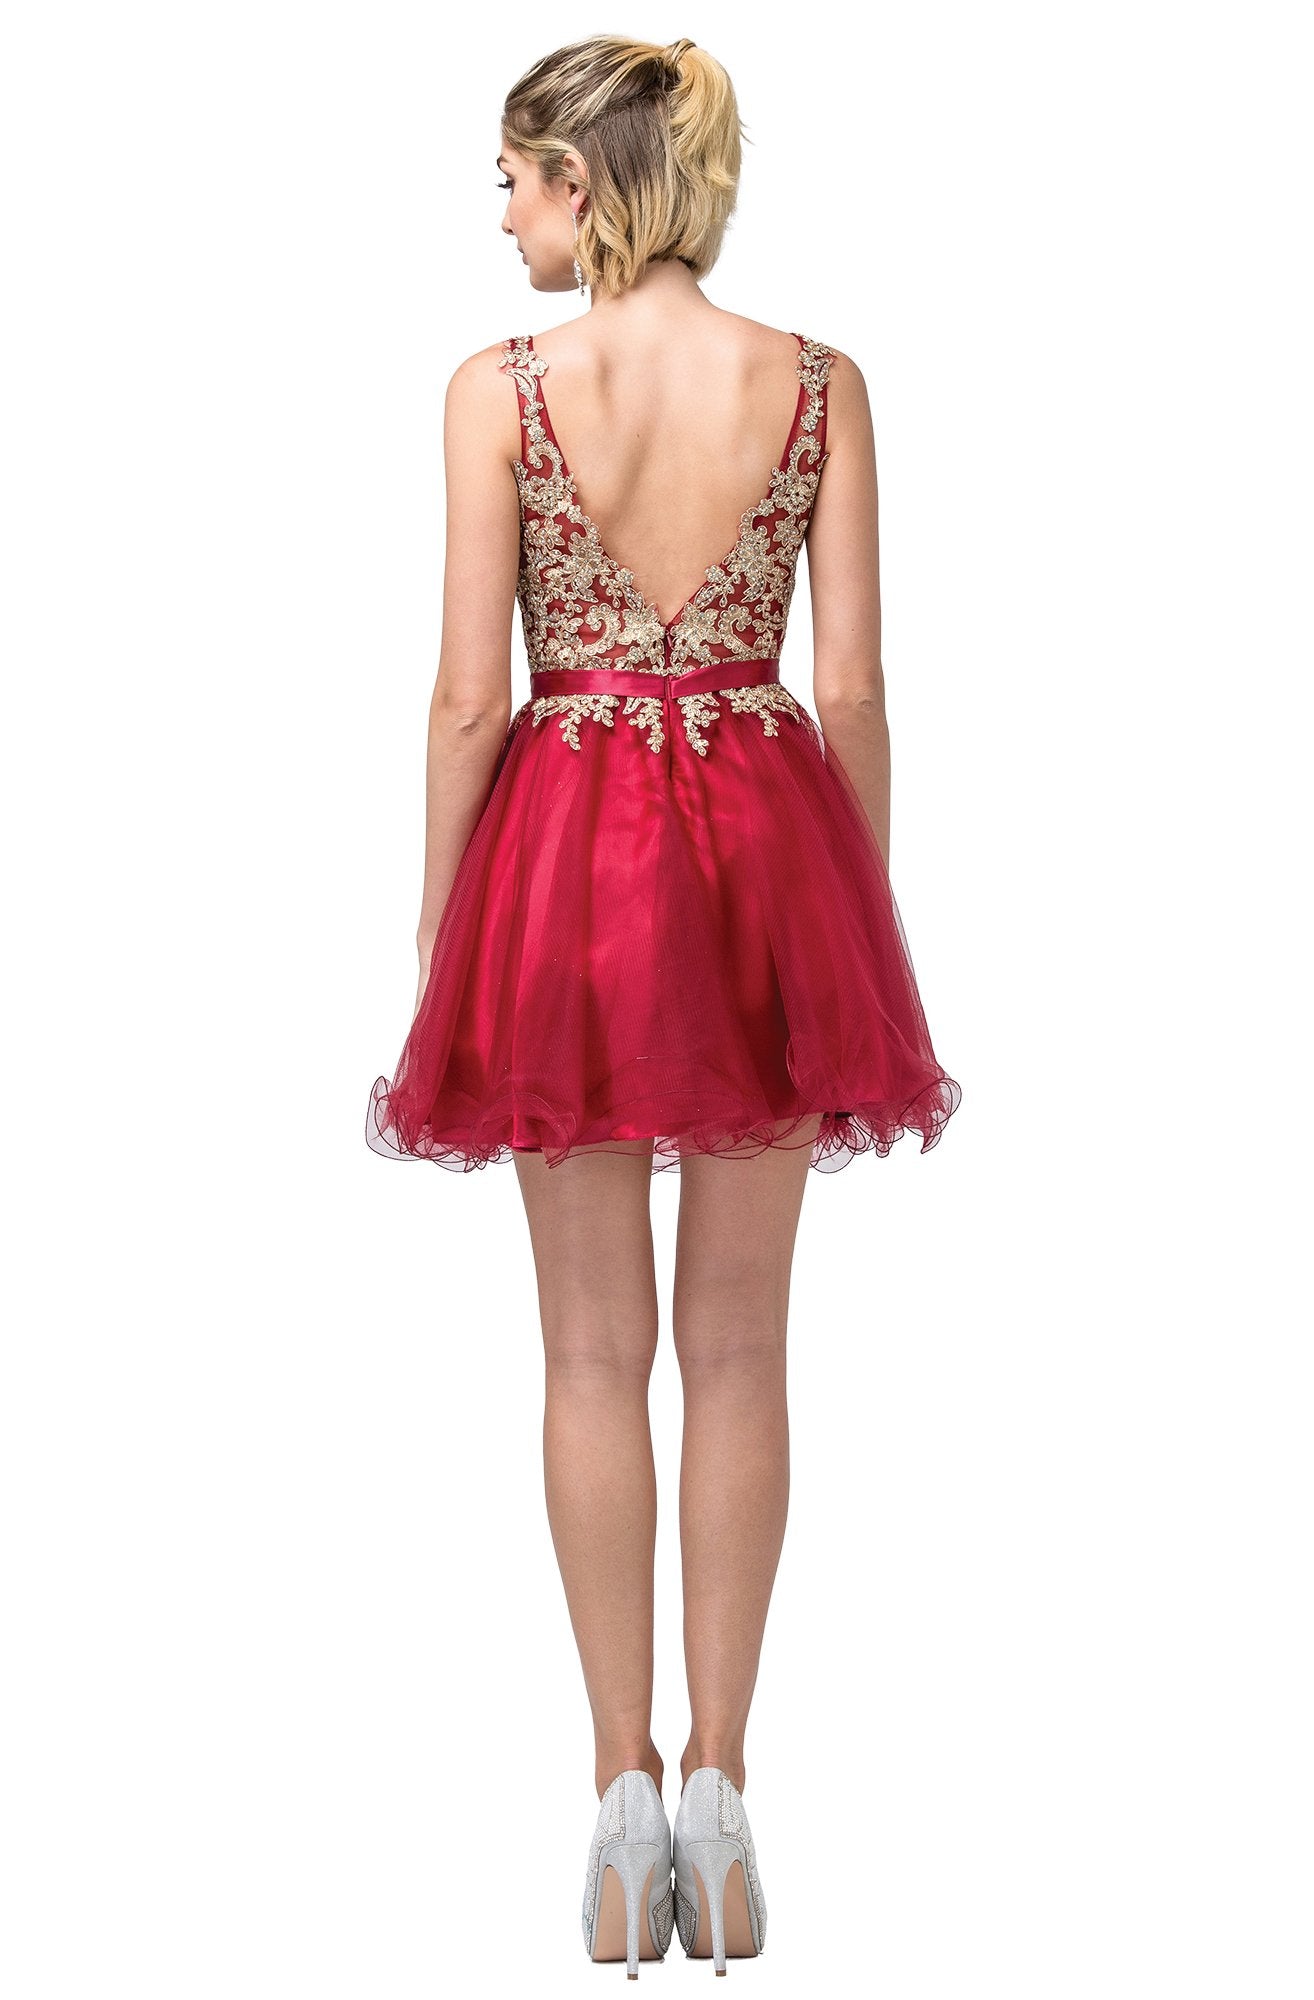 Dancing Queen - 3150 Appliqued Lace Bodice Tulle Dress In Red and Gold